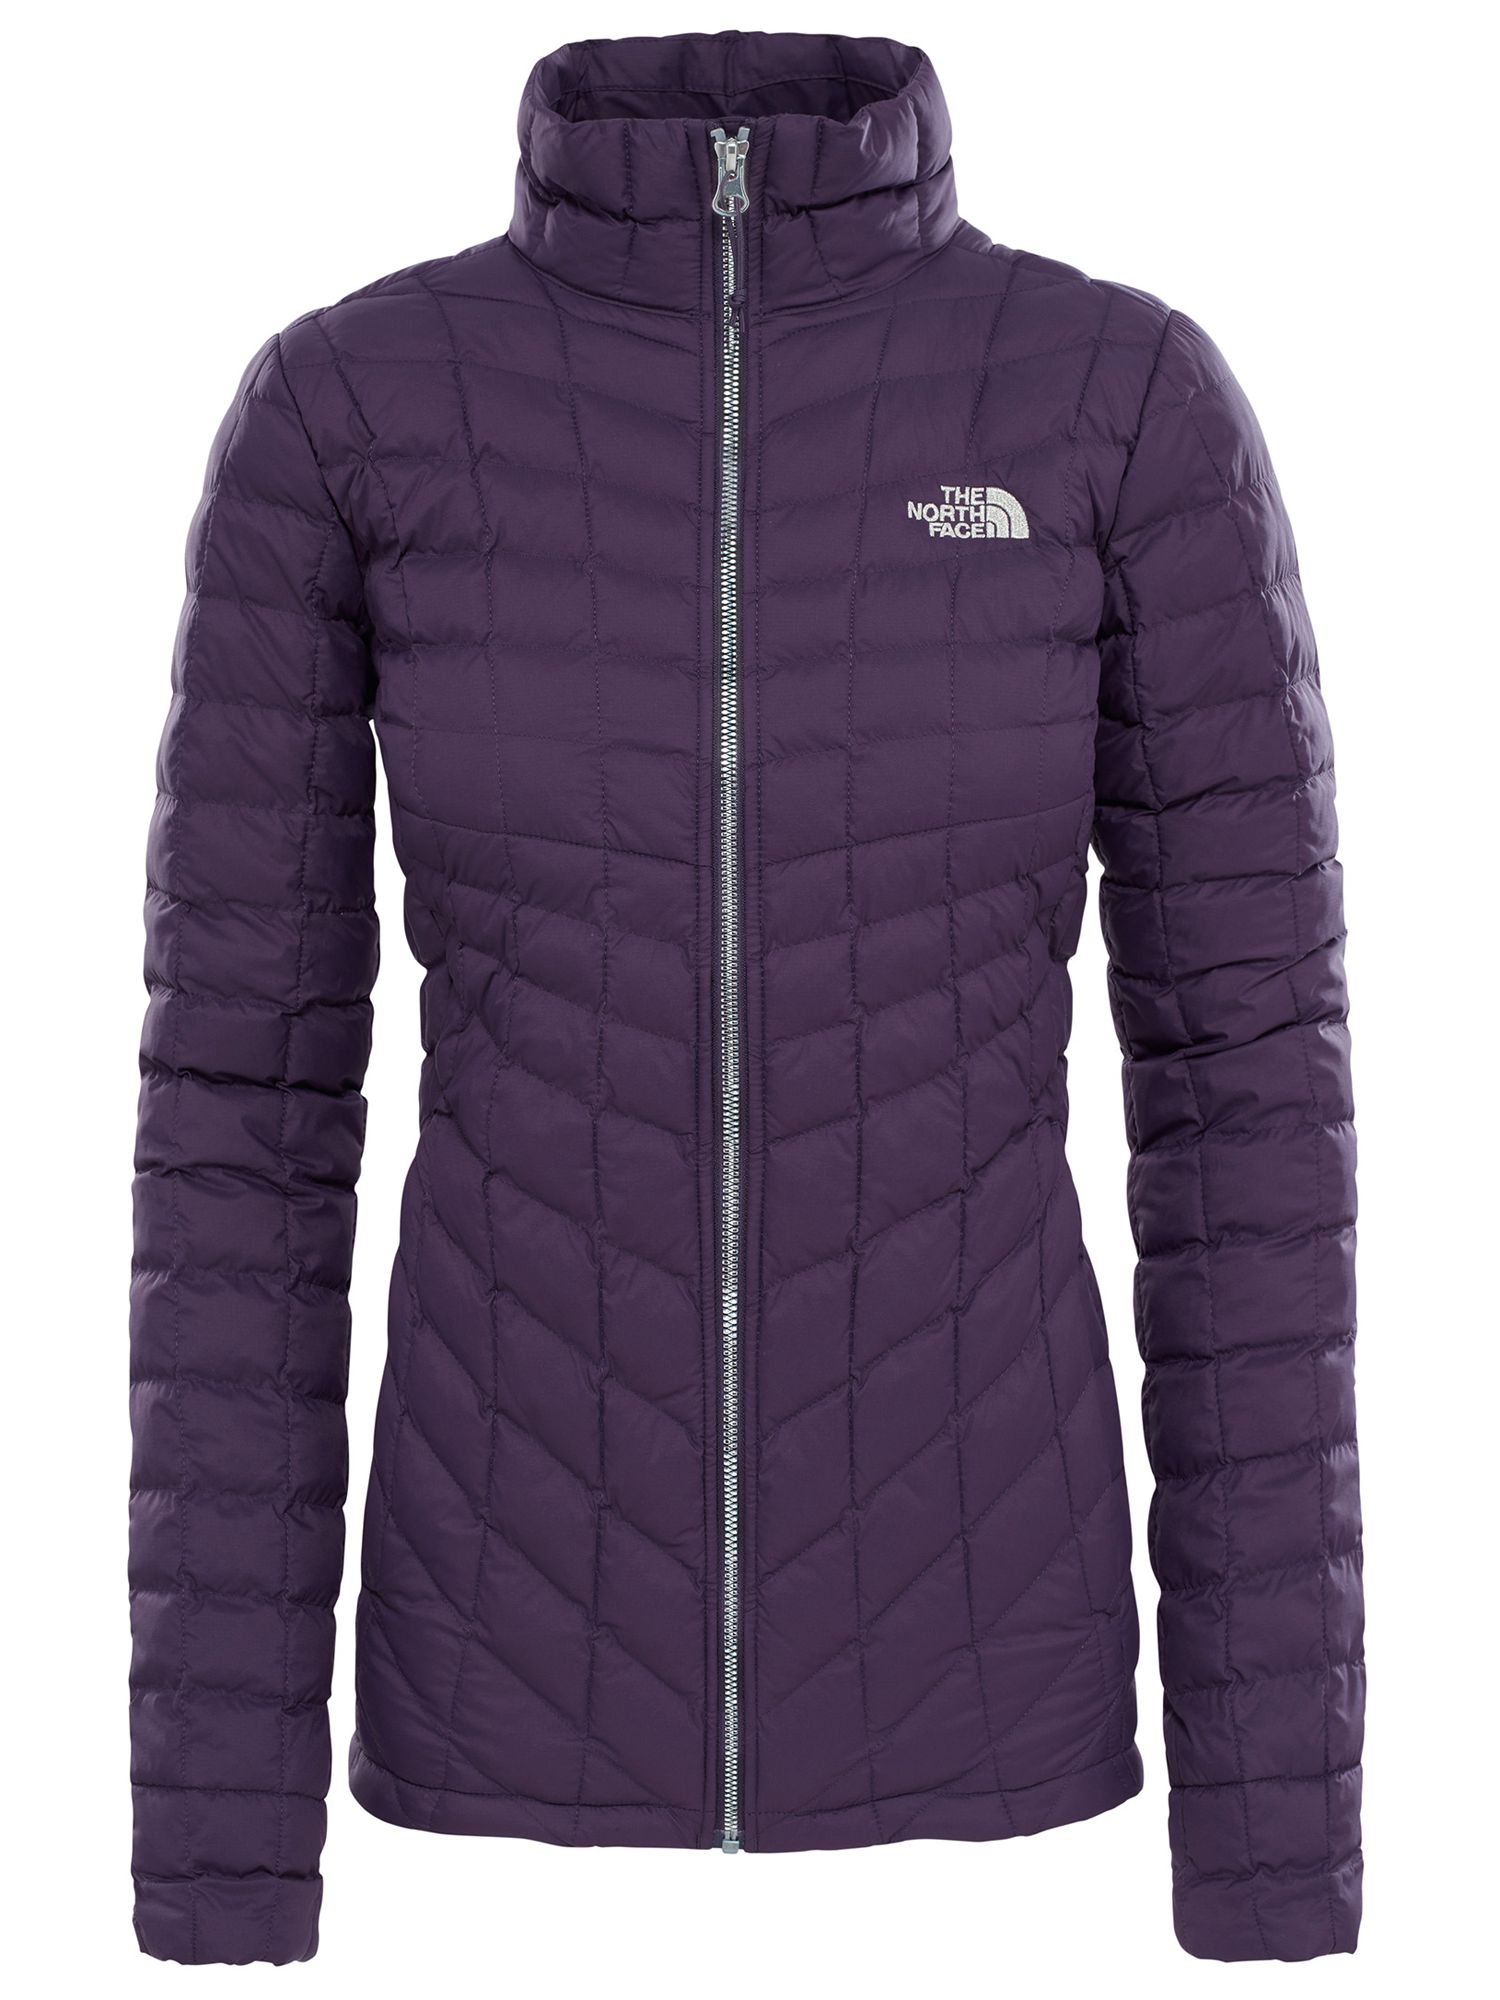 The North Face Thermoball Zip-In Women's Insulated Jacket, Purple, S